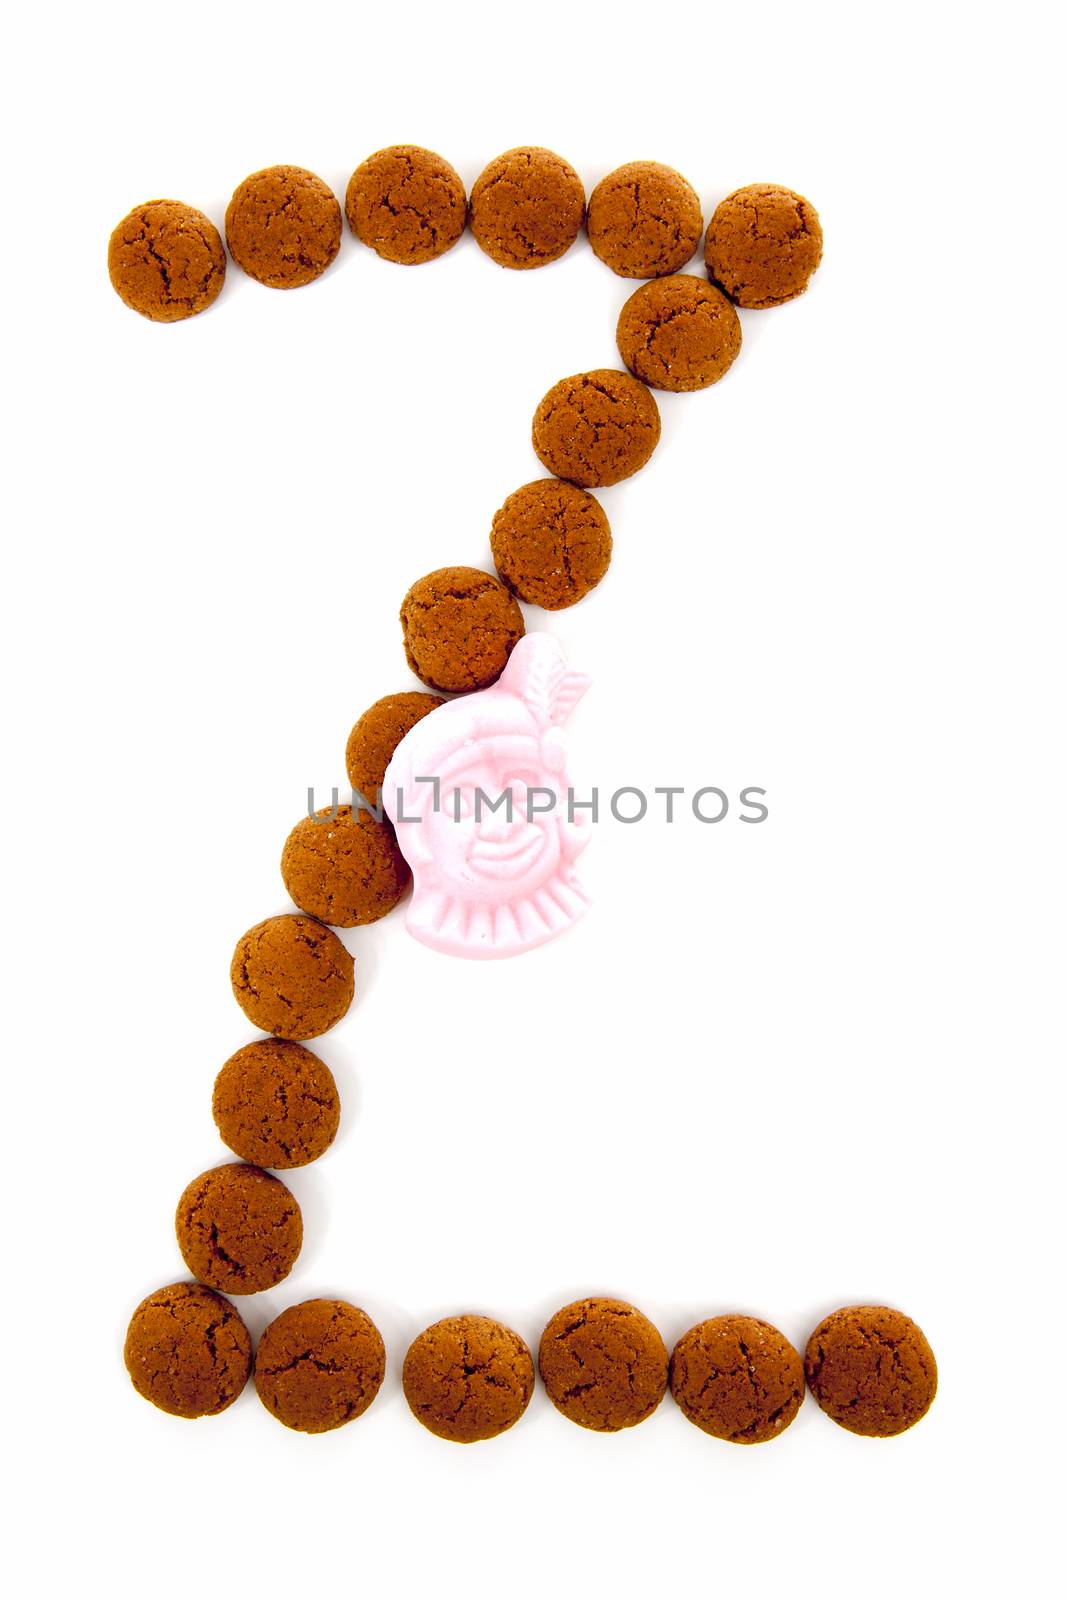 Ginger nuts, pepernoten, in the shape of letter Z isolated on white background. Typical Dutch candy for Sinterklaas event in december